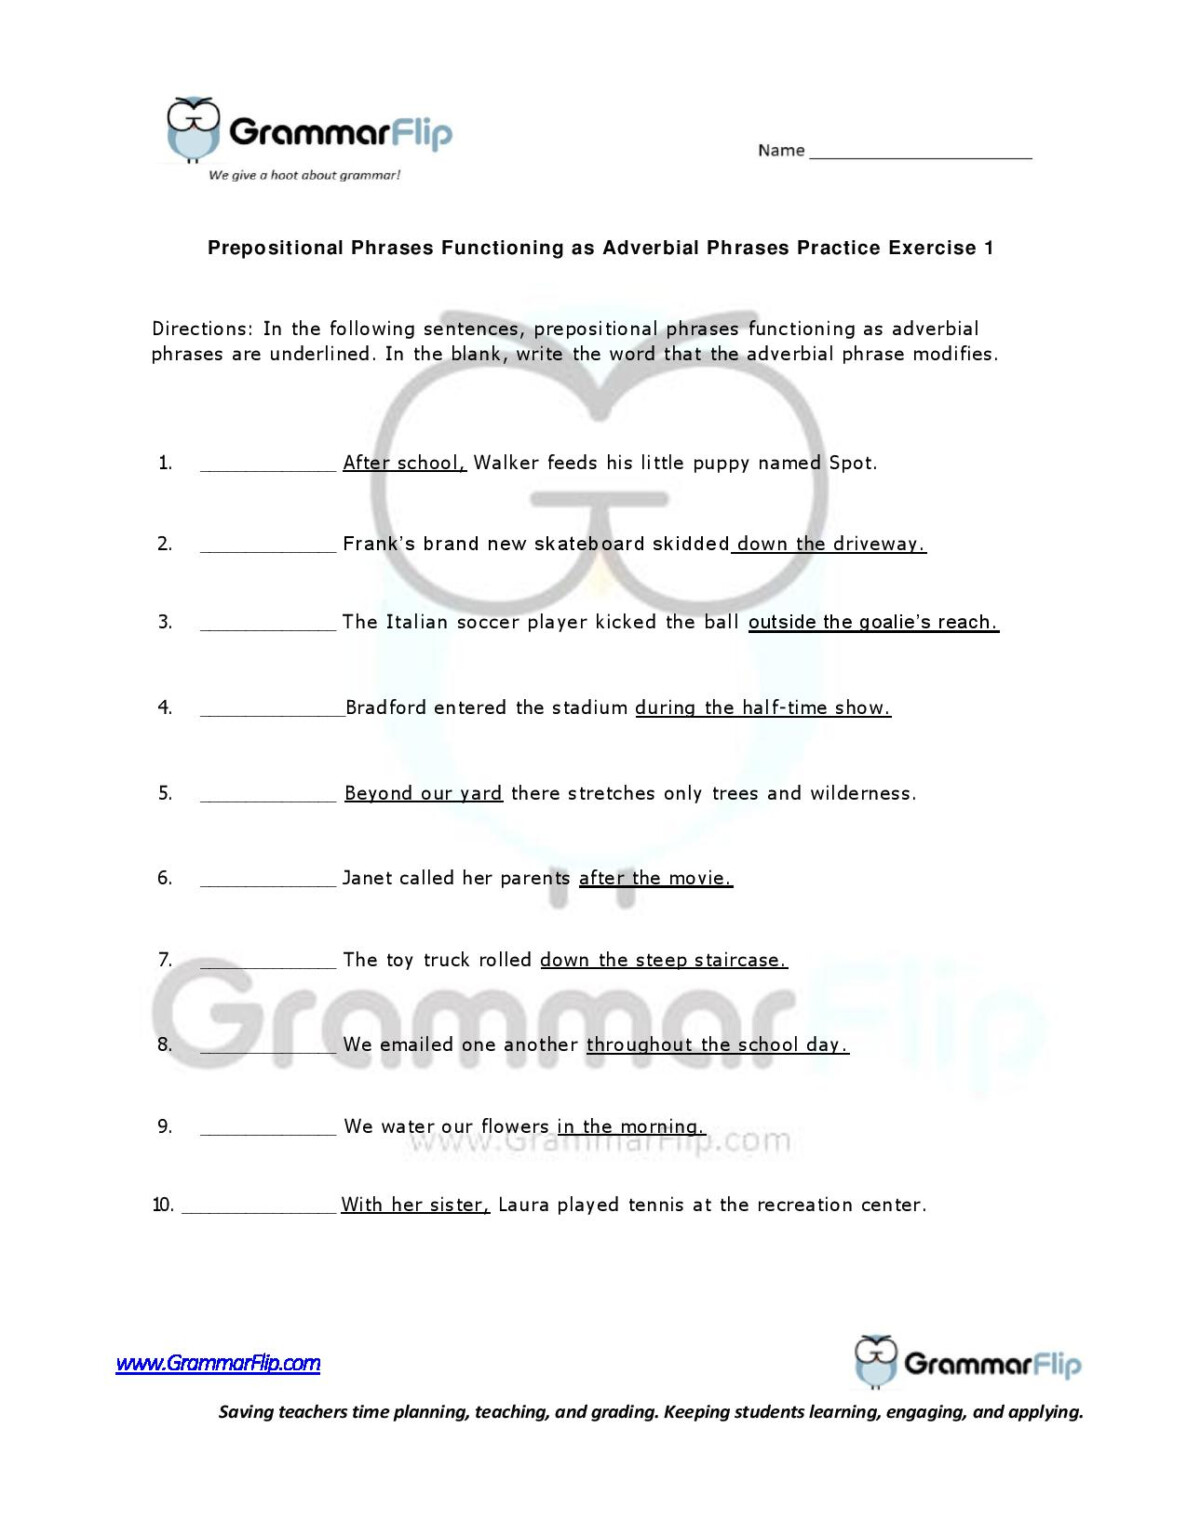 prepositional-phrases-used-as-adjectives-and-adverbs-worksheets-answers-adverbworksheets